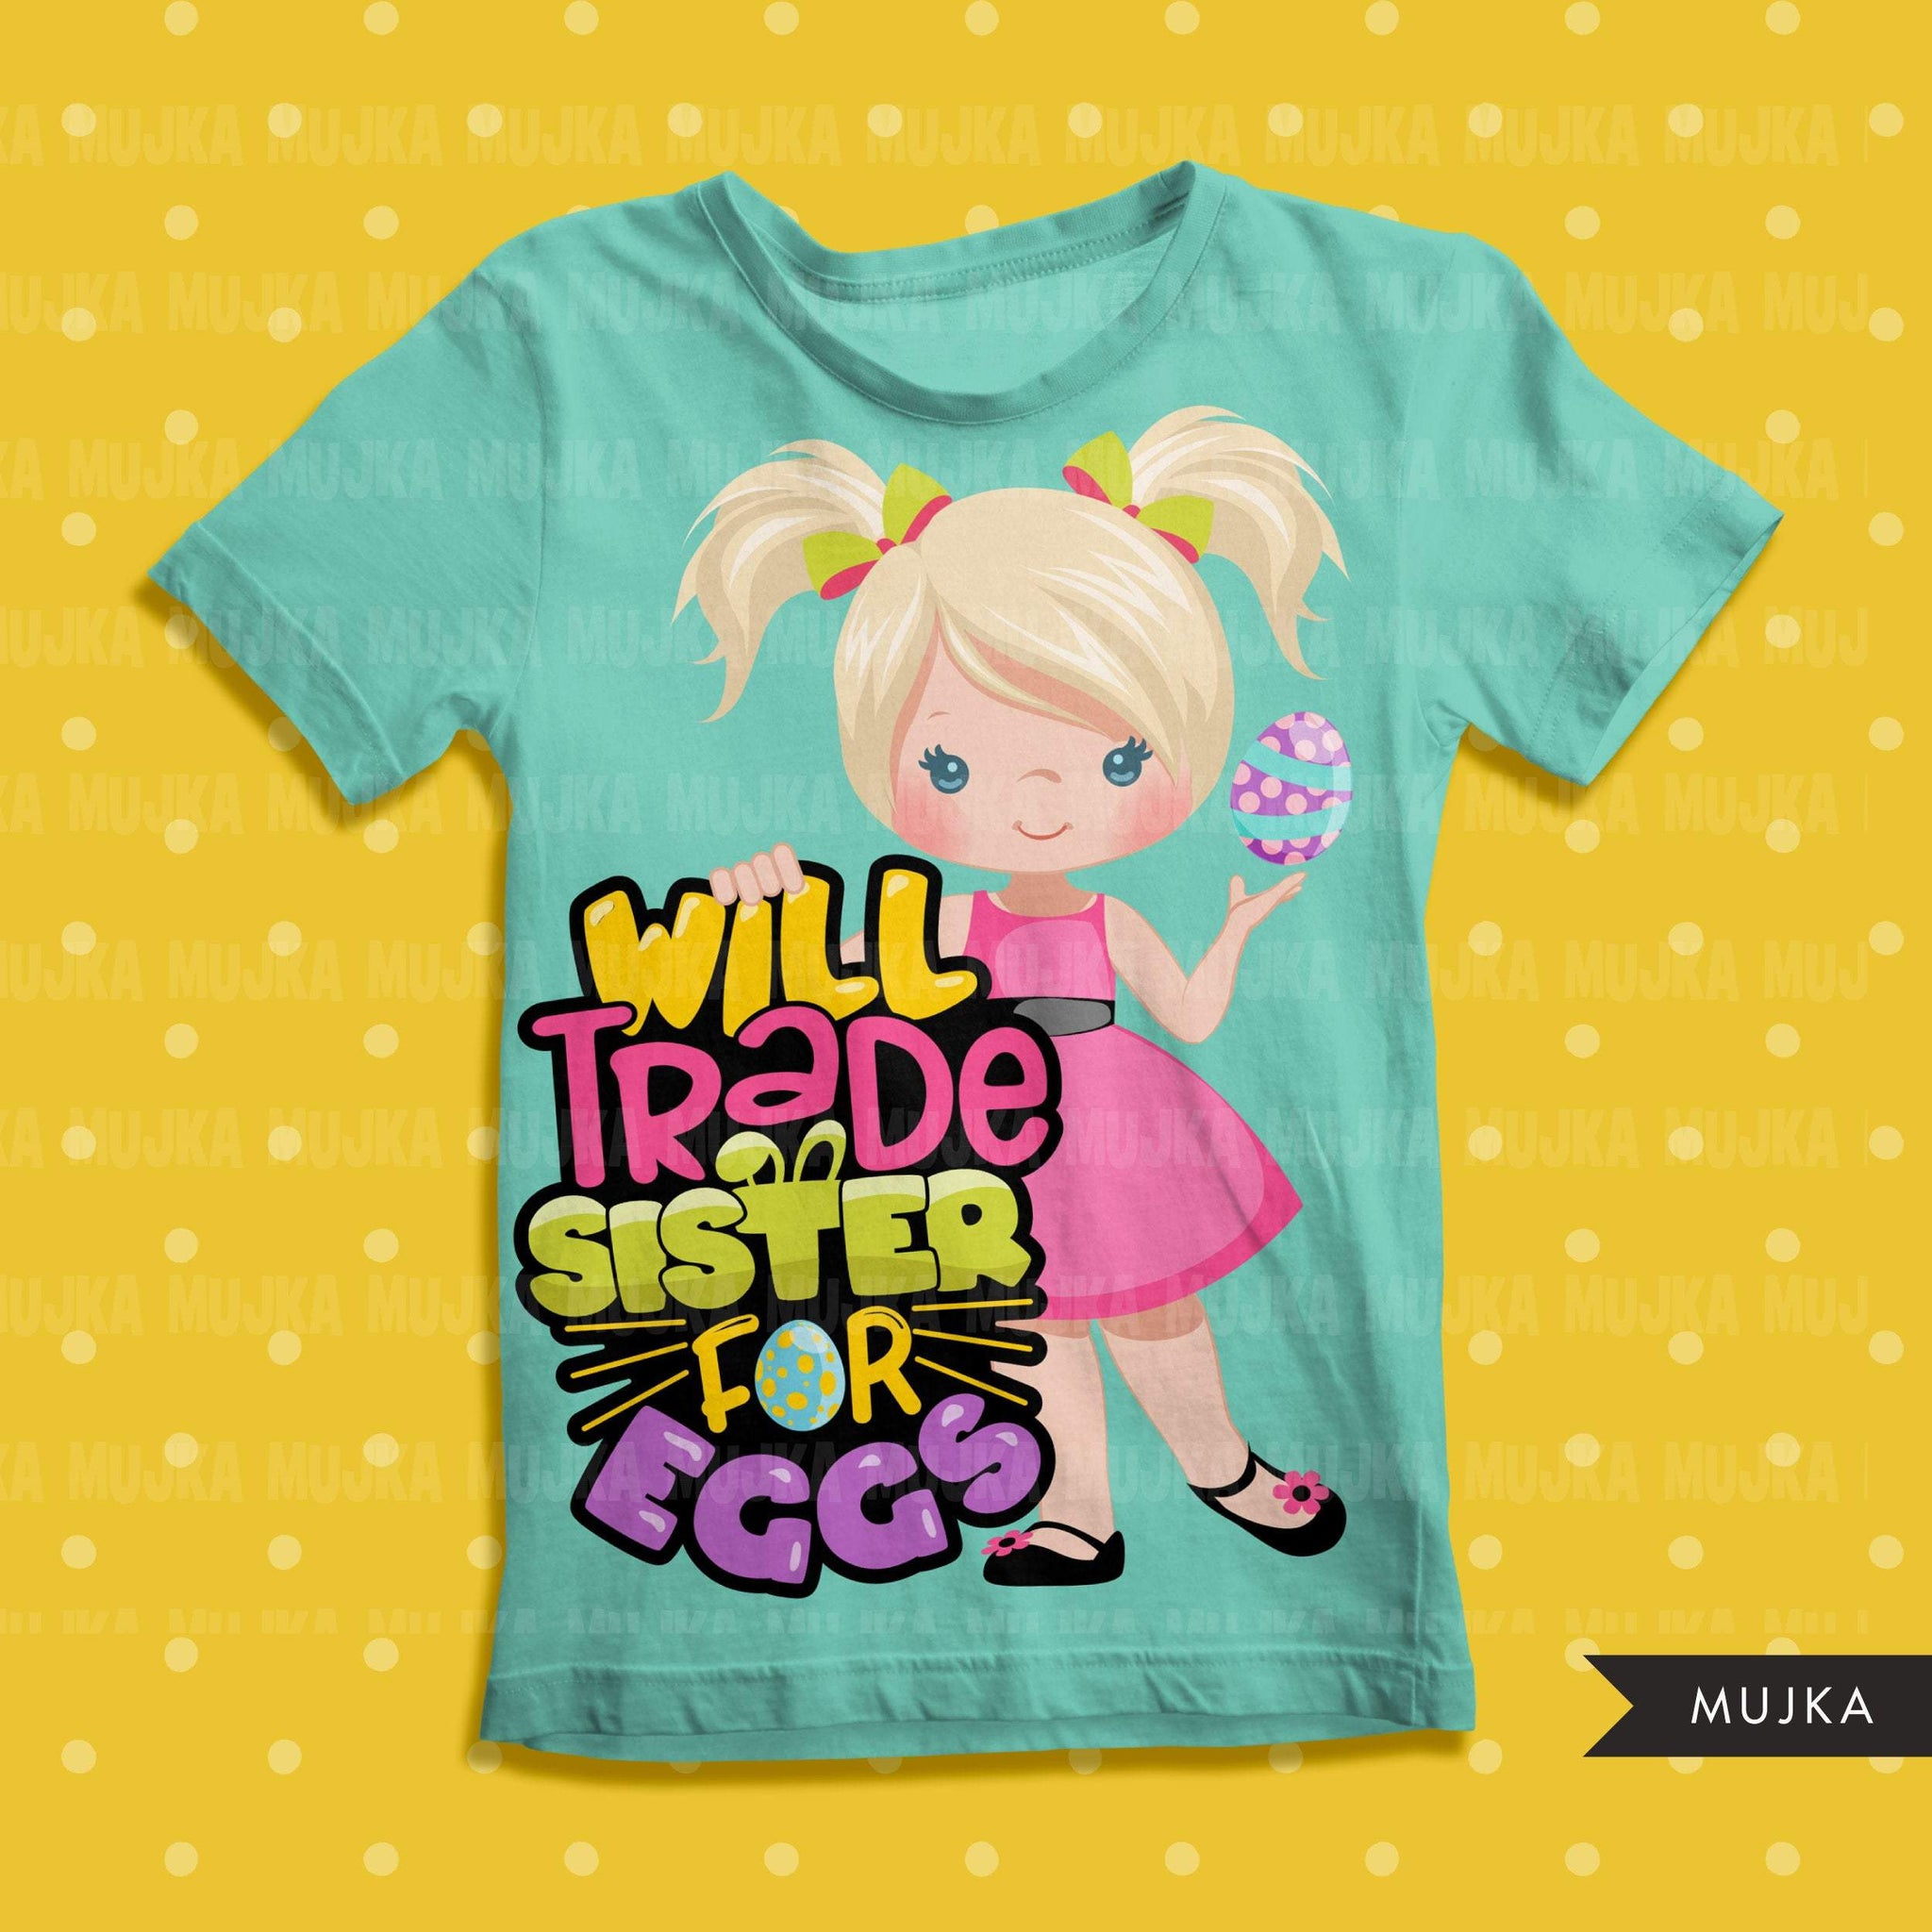 Easter PNG digital, Will trade sister for eggs Printable HTV sublimation image transfer clipart, t-shirt girl graphics